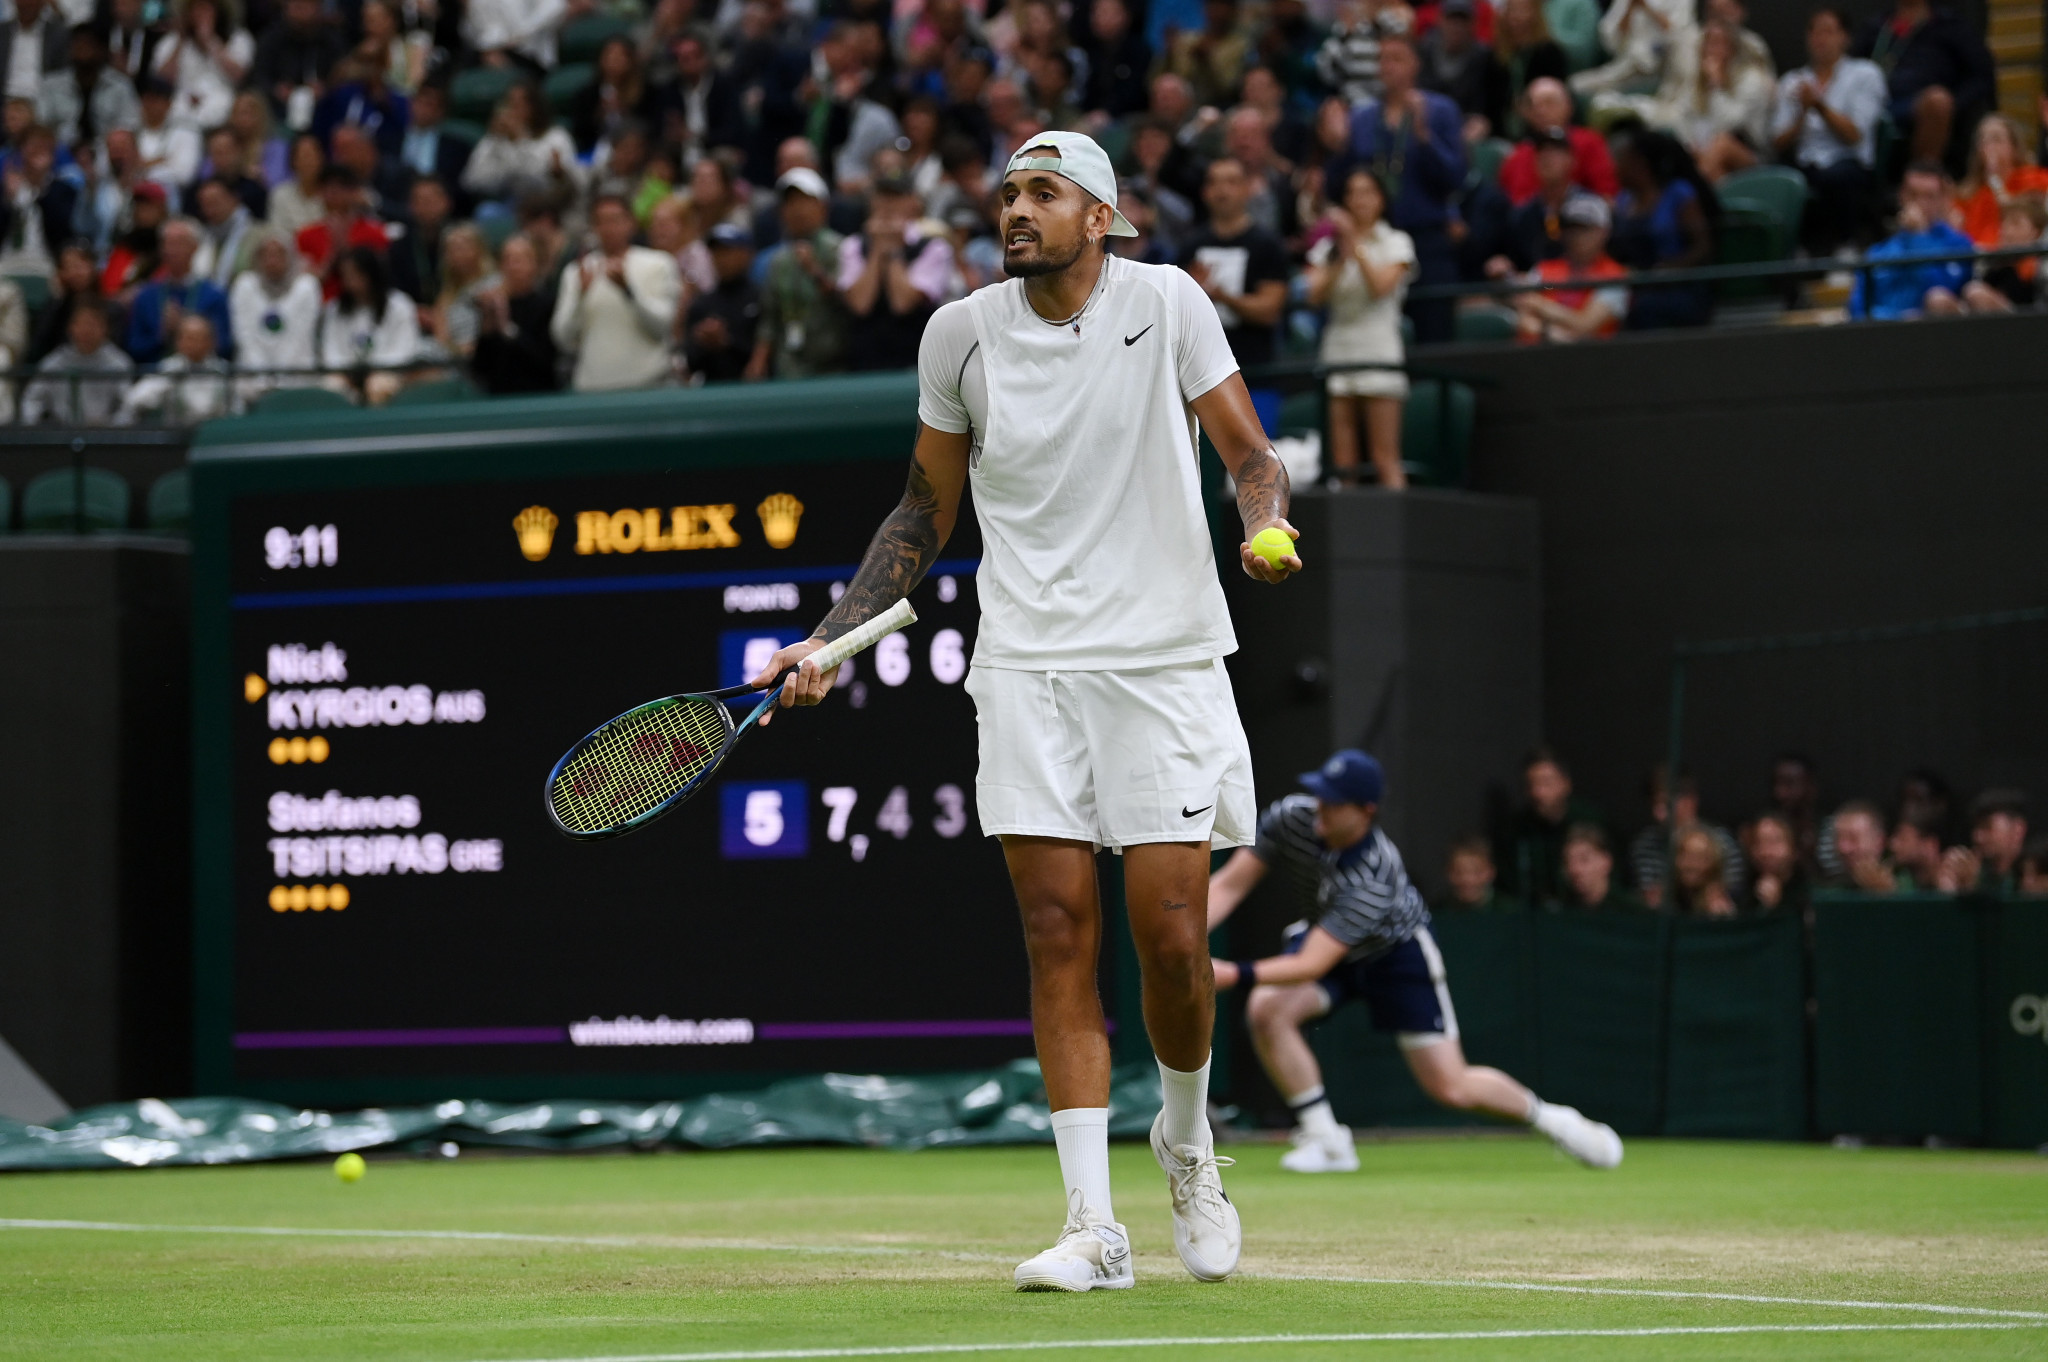 Nick Kyrgios felt Stefanos Tsitsipas should have been defaulted for hitting the ball into the crowd in frustration ©Getty Images